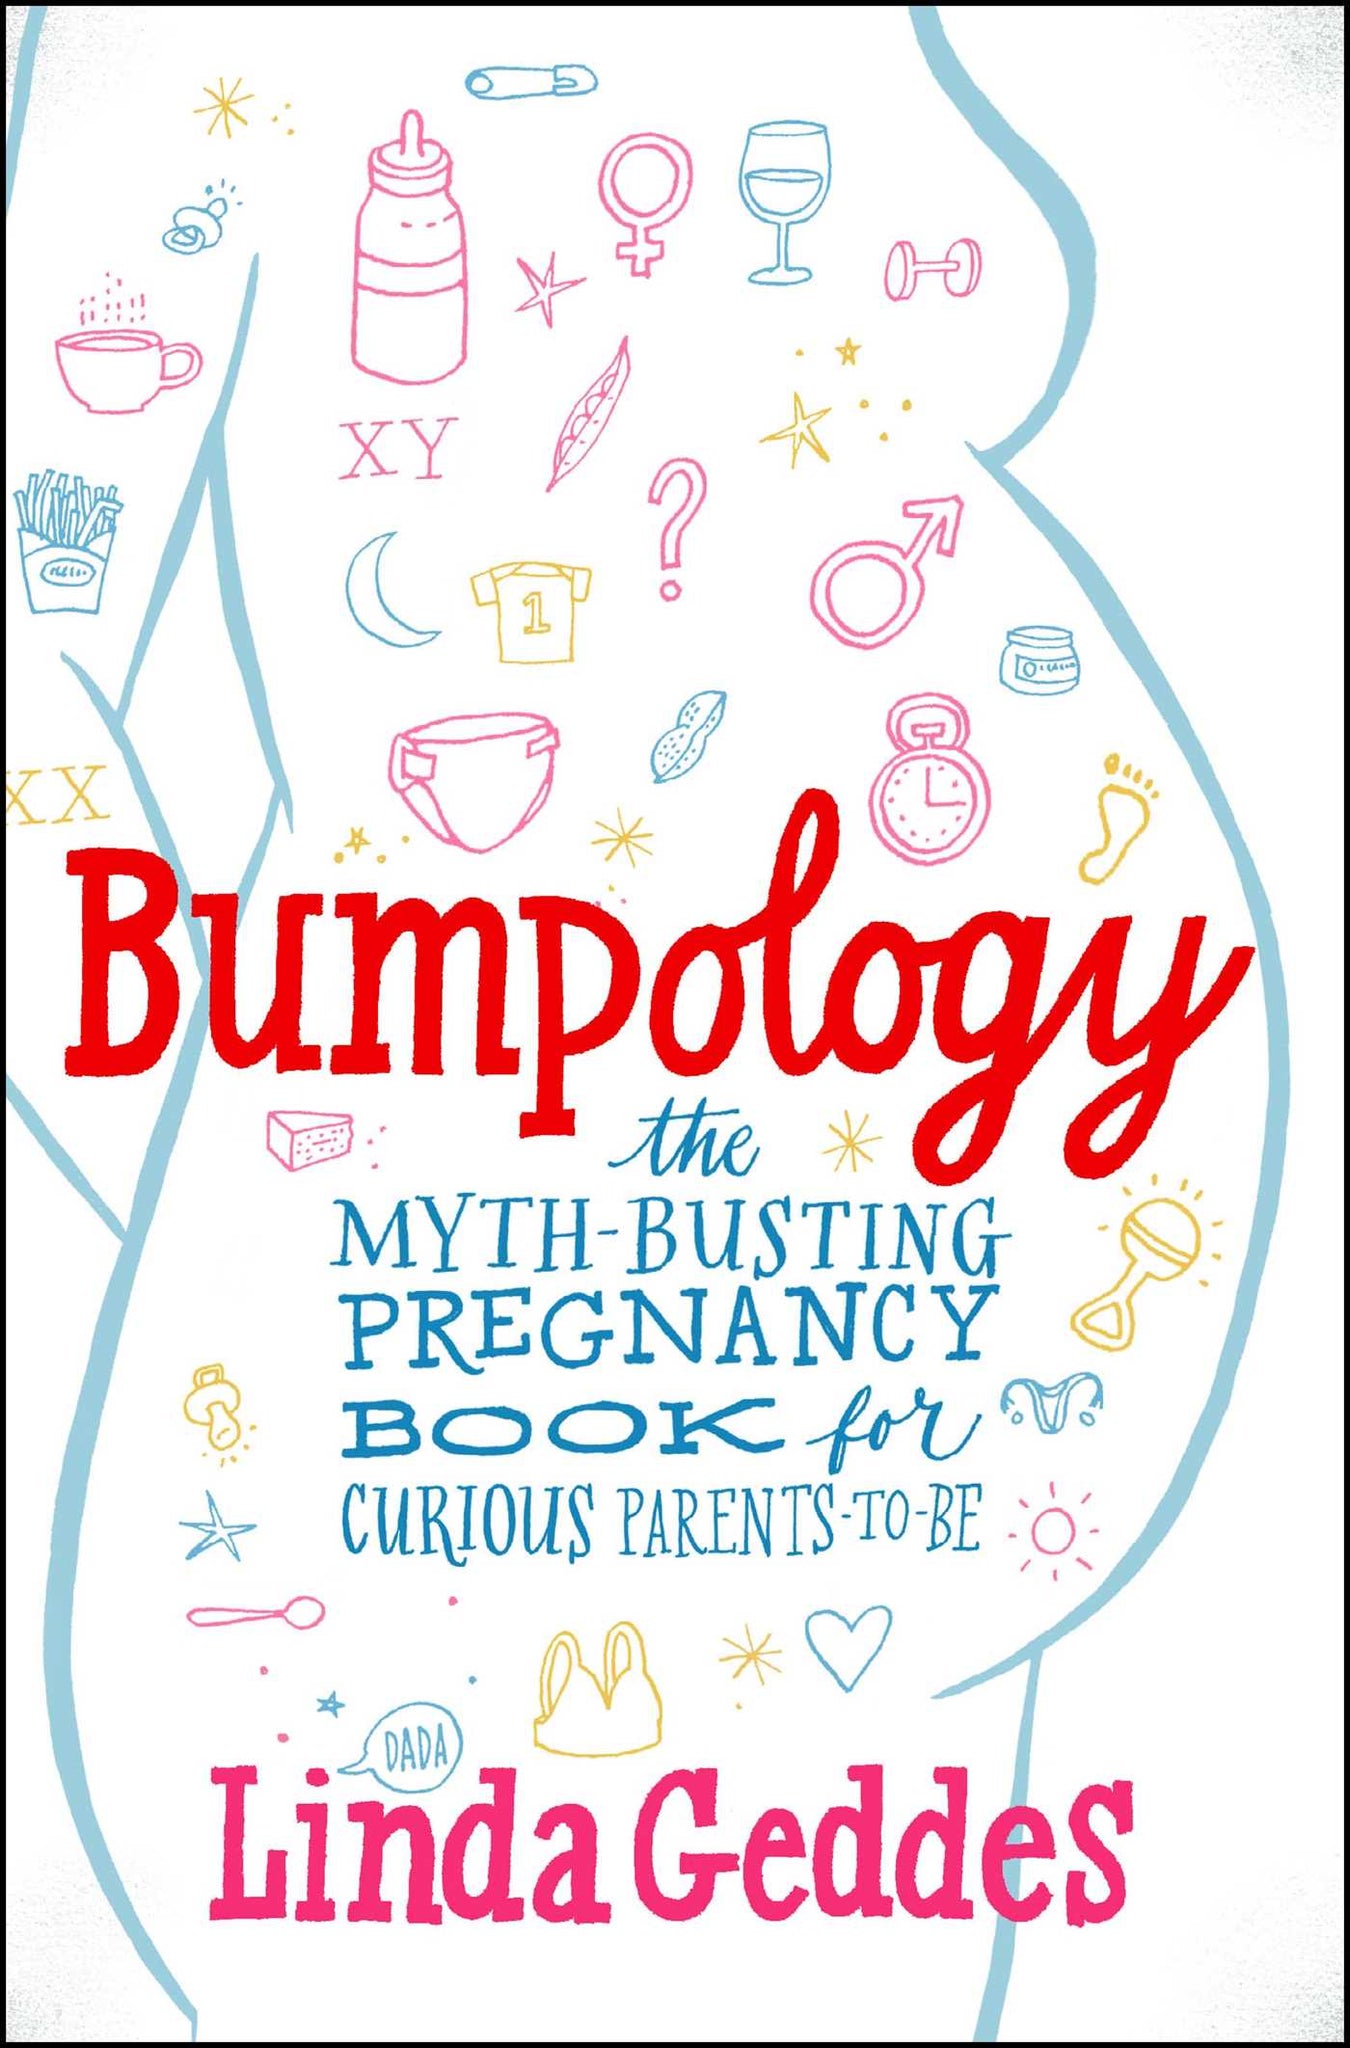 Bumpology : The Myth-Busting Pregnancy Book for Curious Parents-To-Be